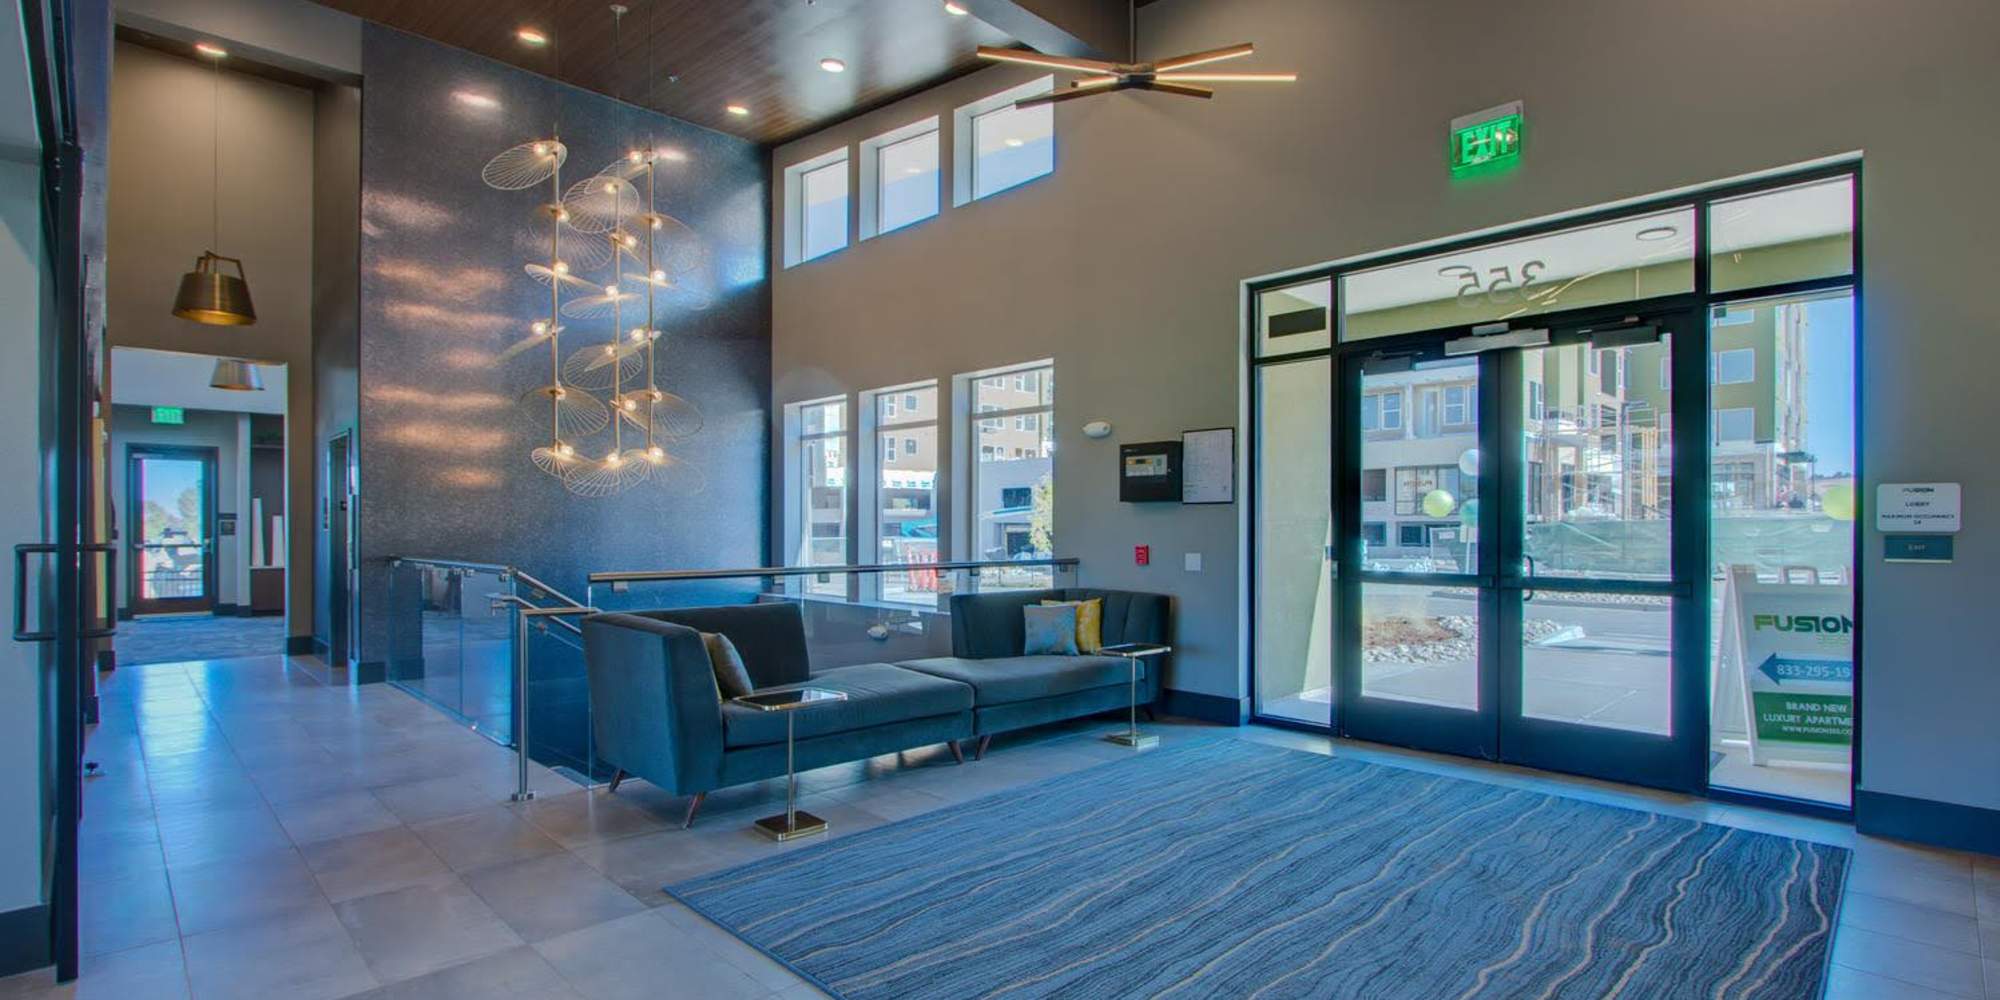 Entrance to the lobby at Fusion 355 in Broomfield, Colorado